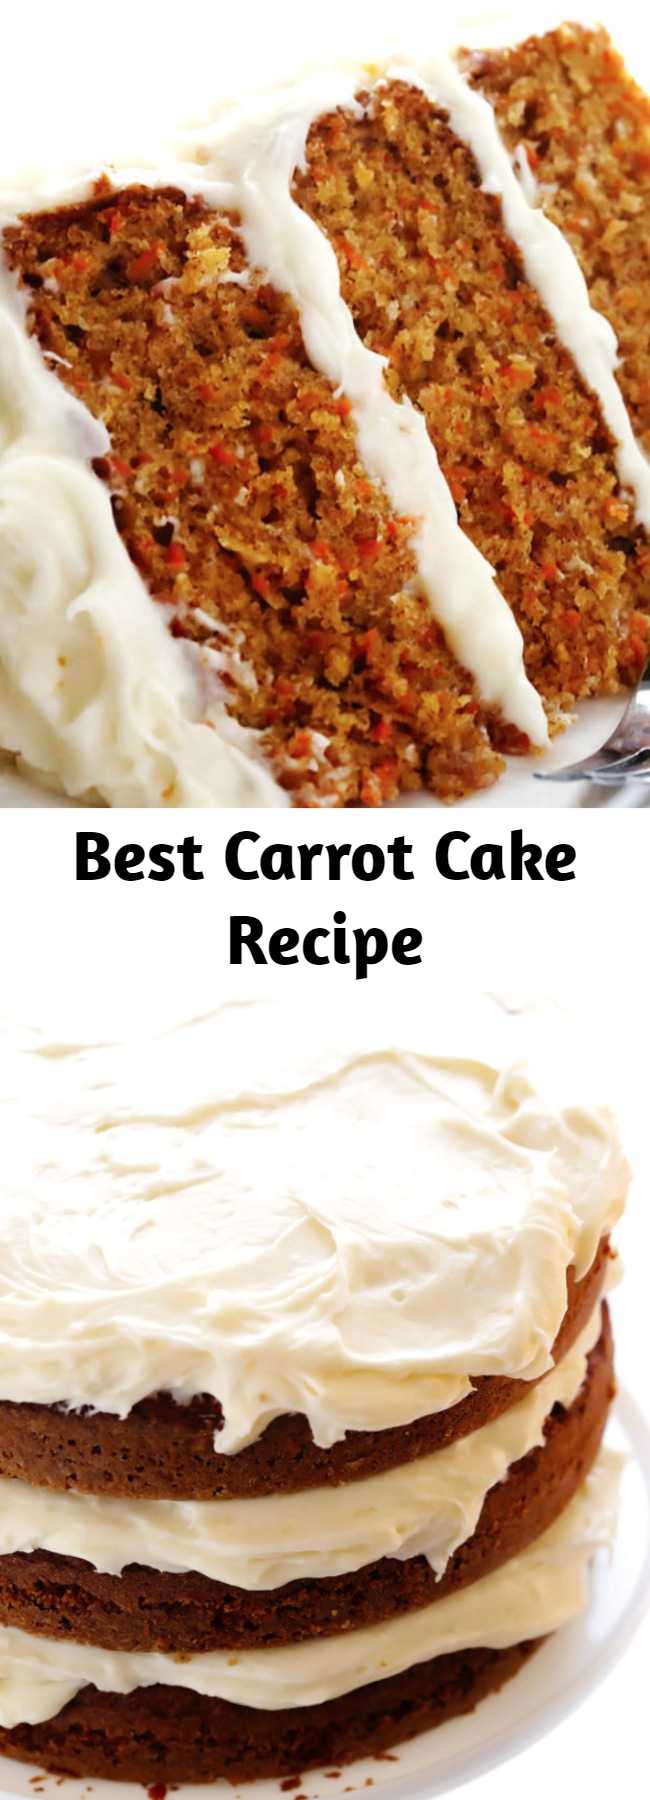 Best Carrot Cake Recipe - This classic carrot cake recipe is moist, perfectly-spiced and made with lots of fresh carrots and a cream cheese frosting.